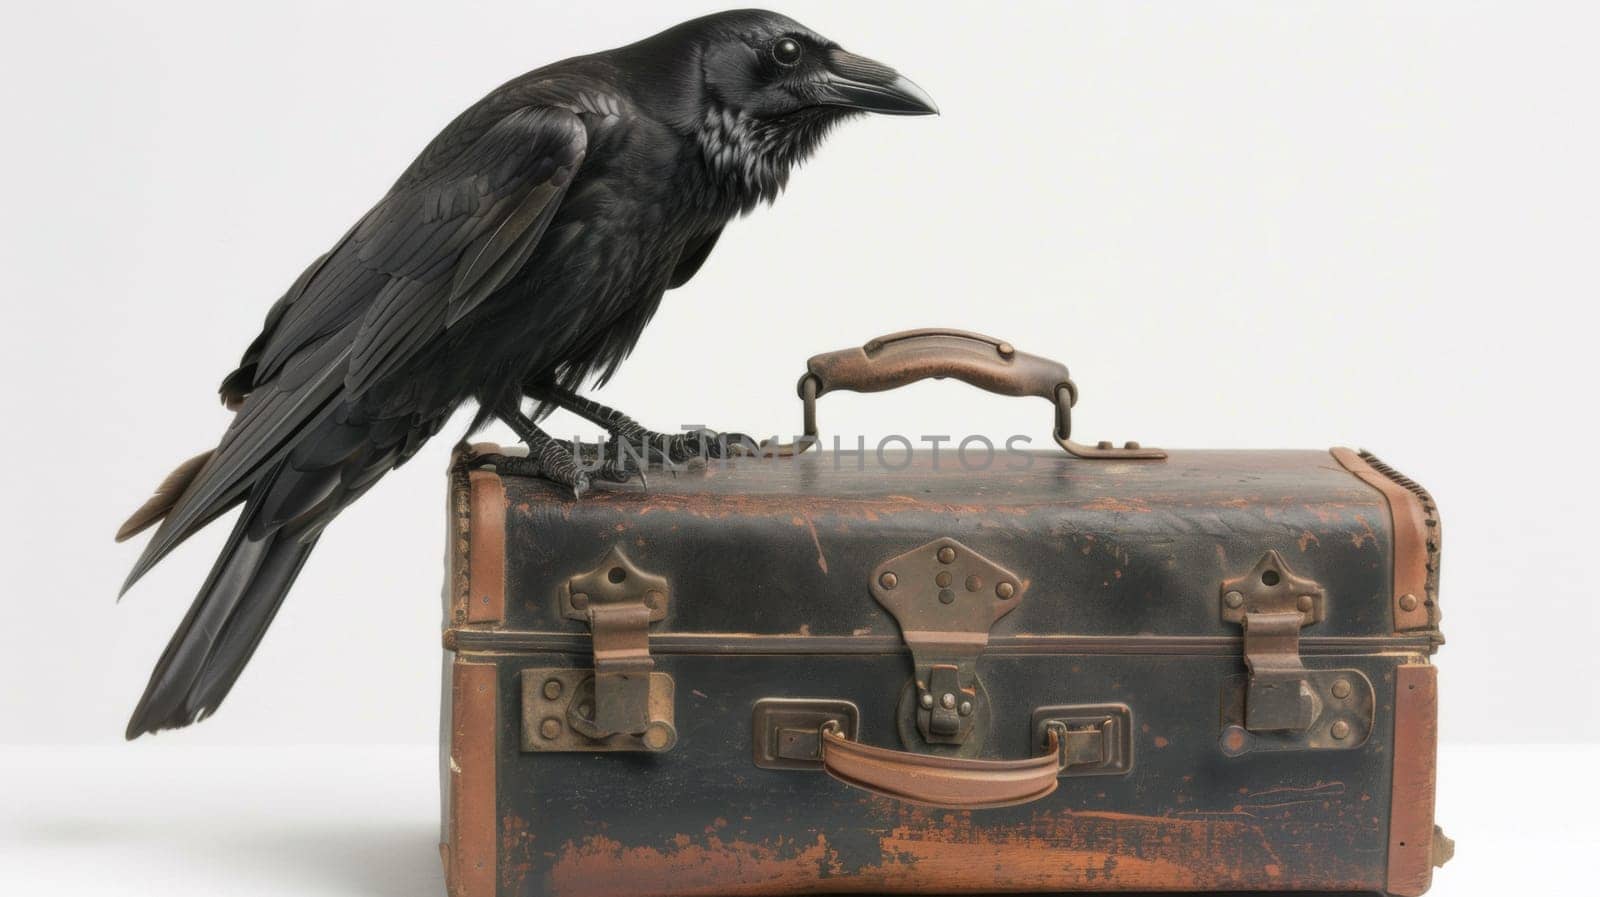 A black bird perched on a brown suitcase with white background, AI by starush